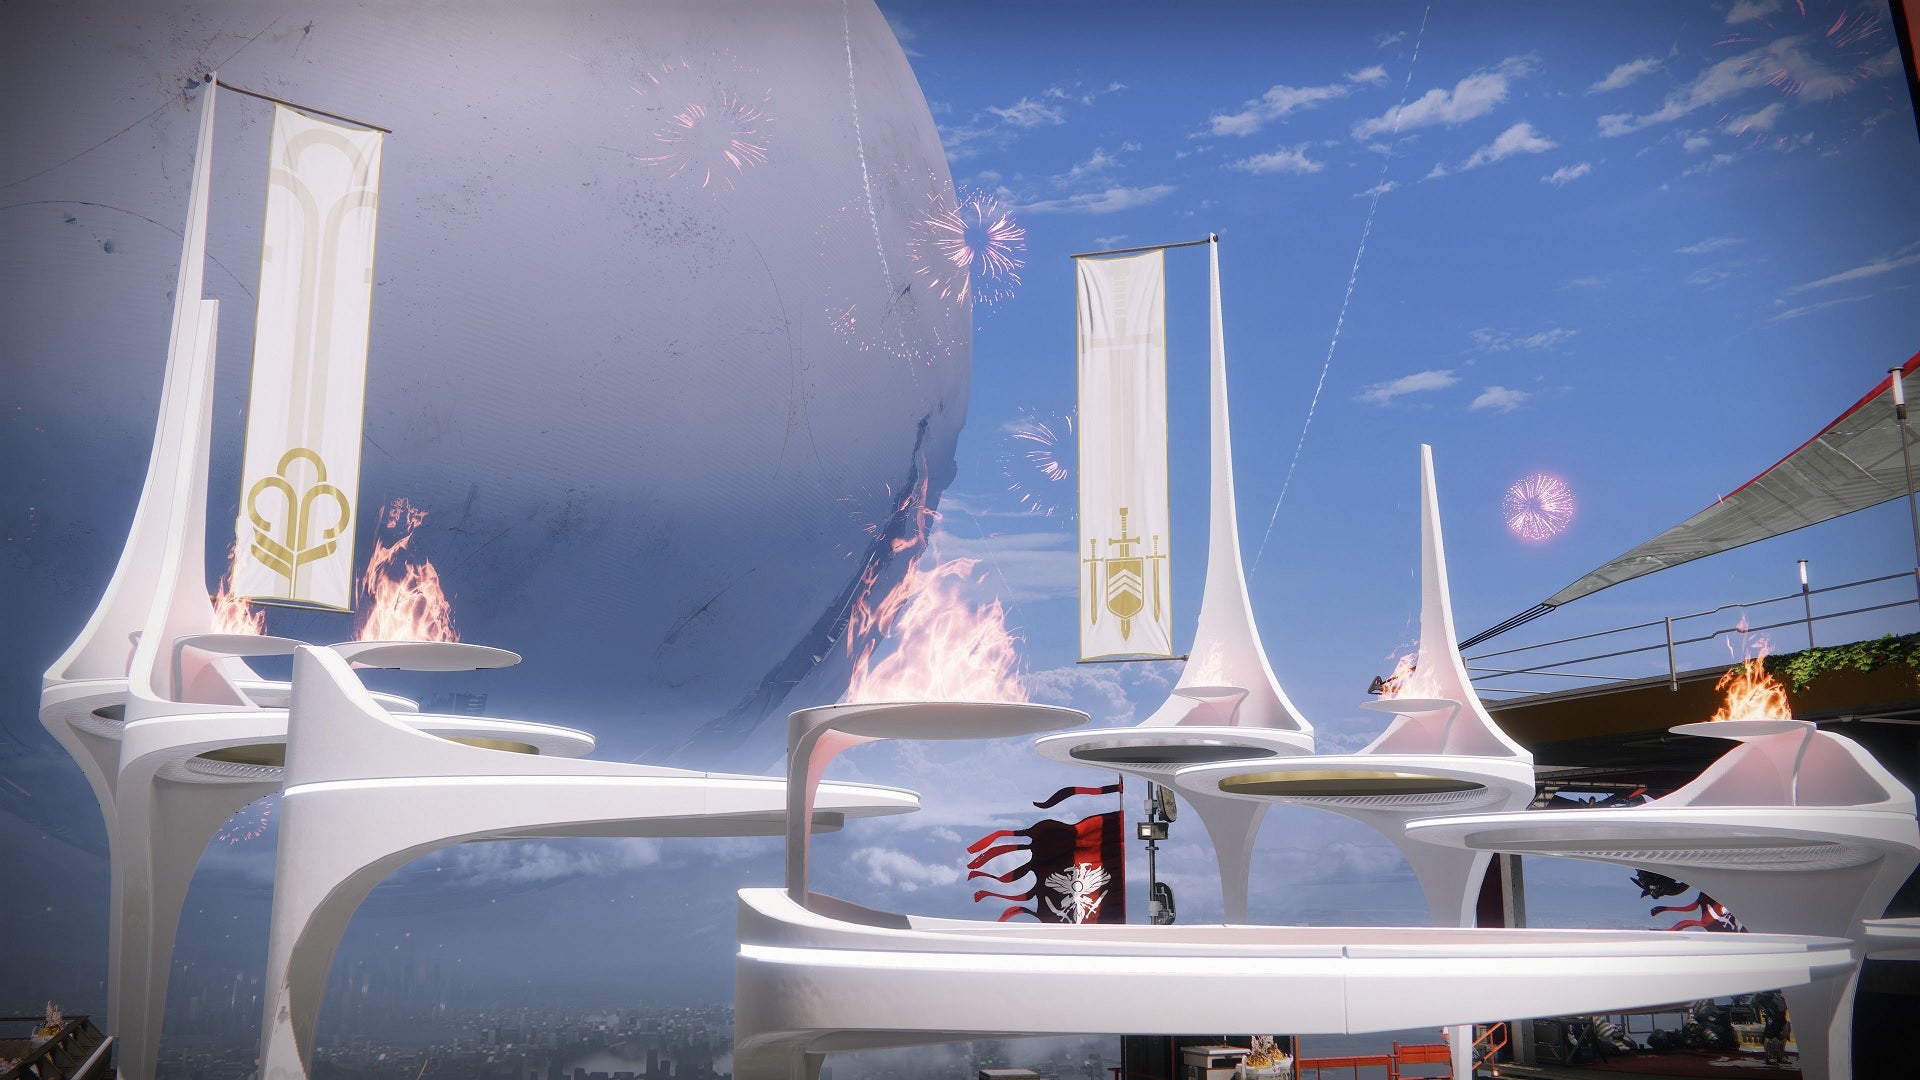 The Guardian Game podium in the Tower in Destiny 2.